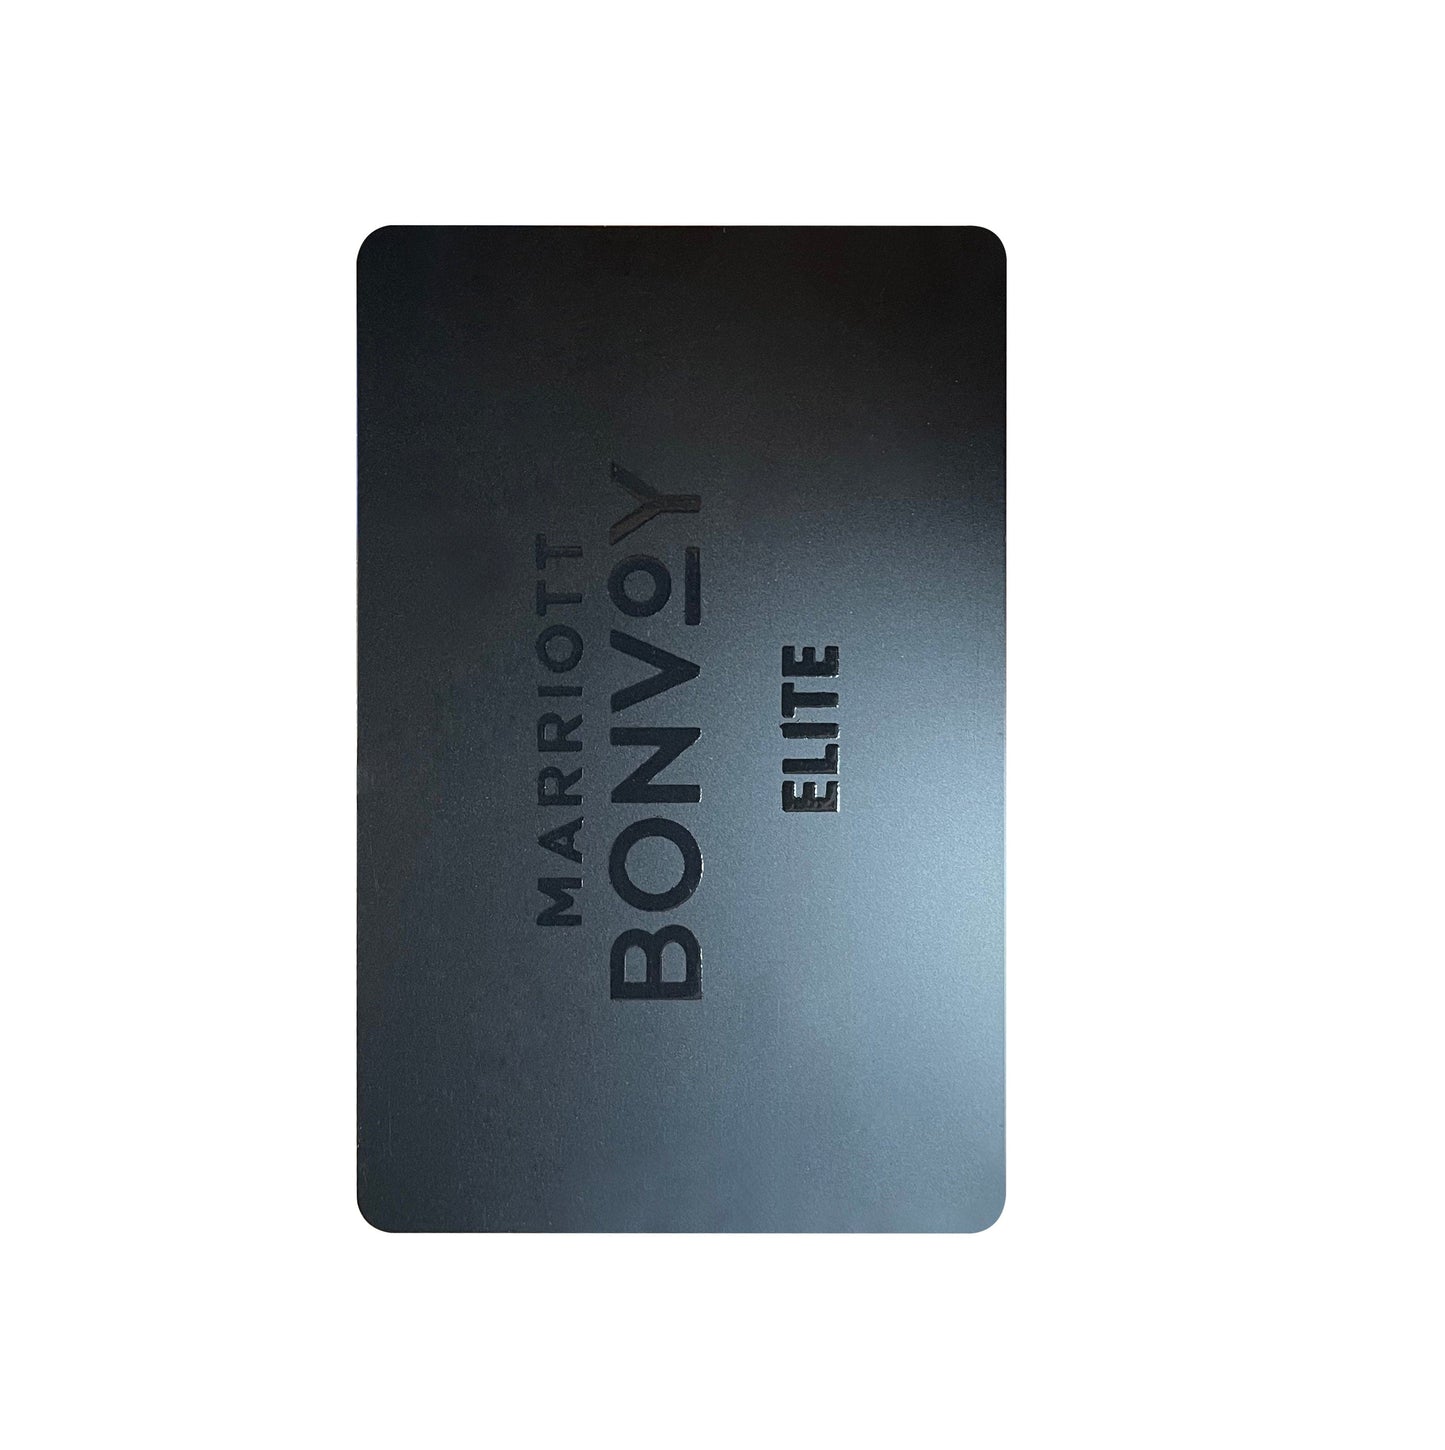 Assa Abloy Compatible Marriott Bonvoy Member RFID Key Cards (Sold in boxes of 200)